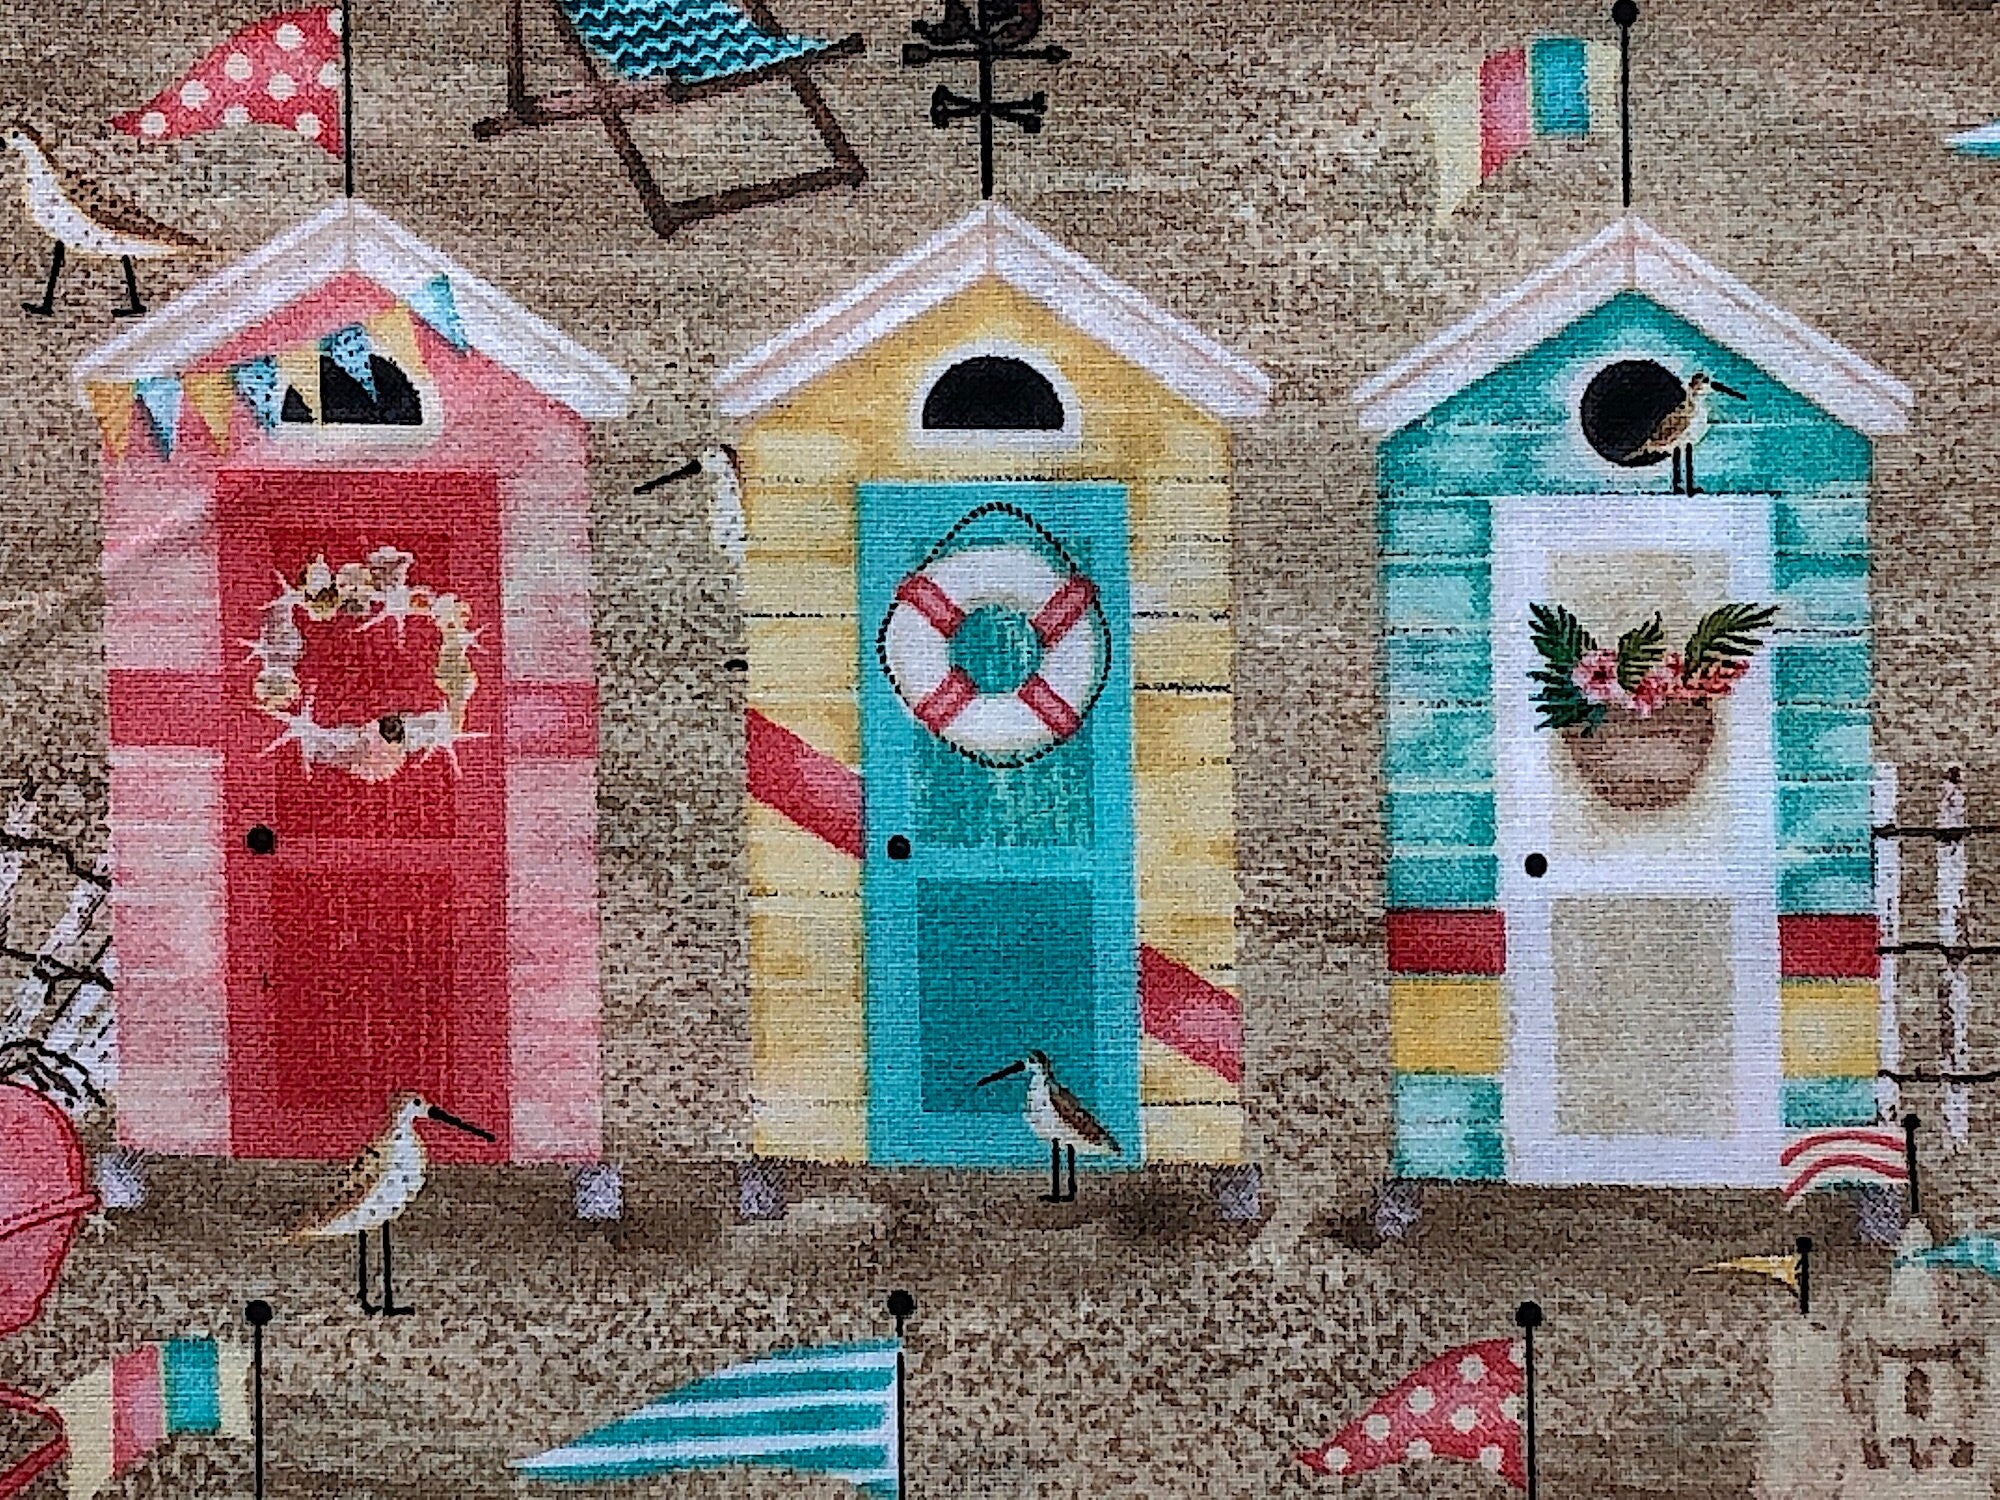 Close up of beach huts, birds, chairs and more.